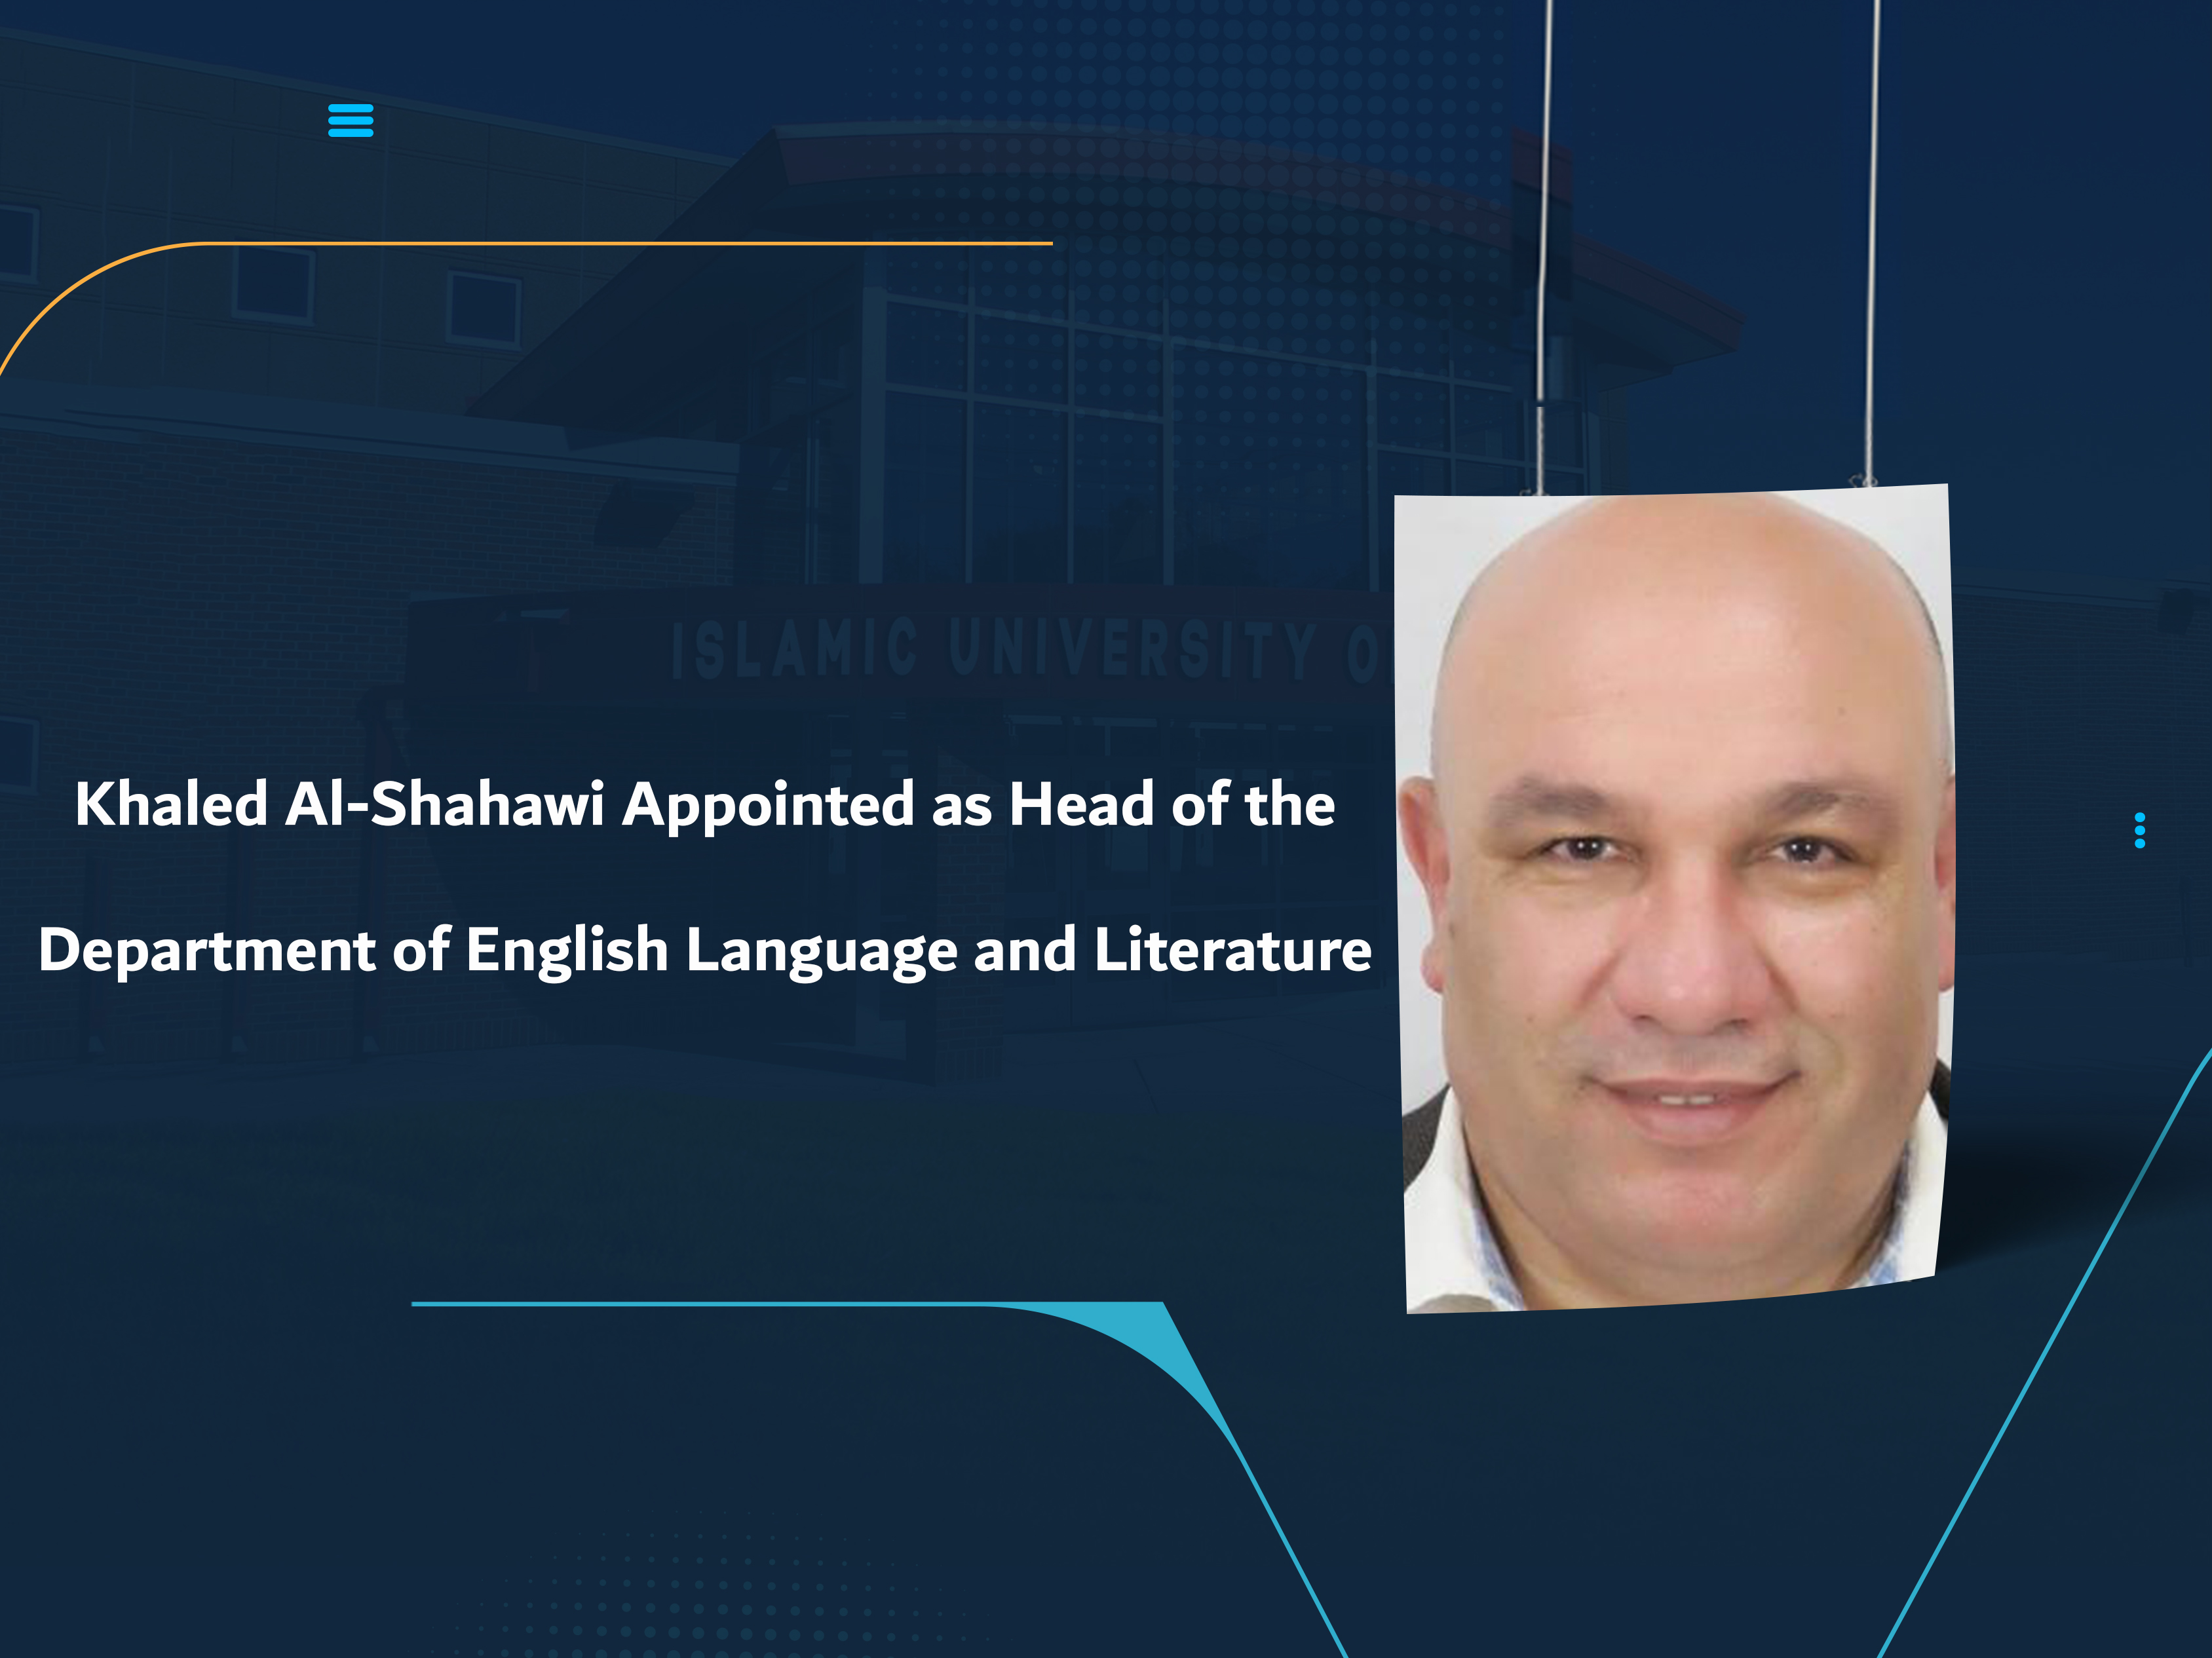 Khaled Al-Shahawi Appointed as Head of the Department of English Language and Literature